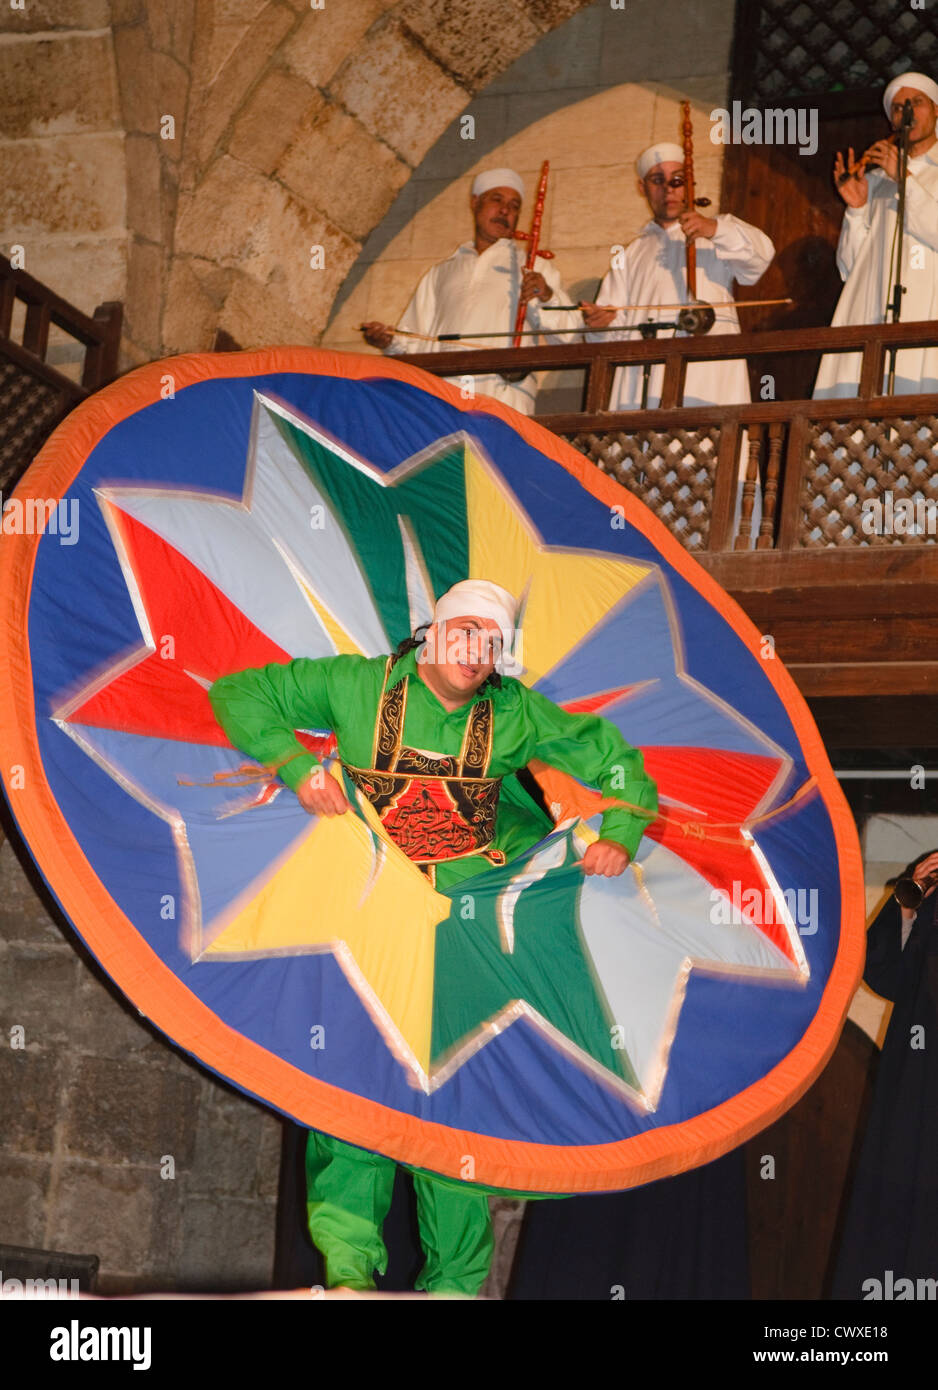 whirling dervish Sufi dancer in motion at performace in Cairo Egypt Stock Photo